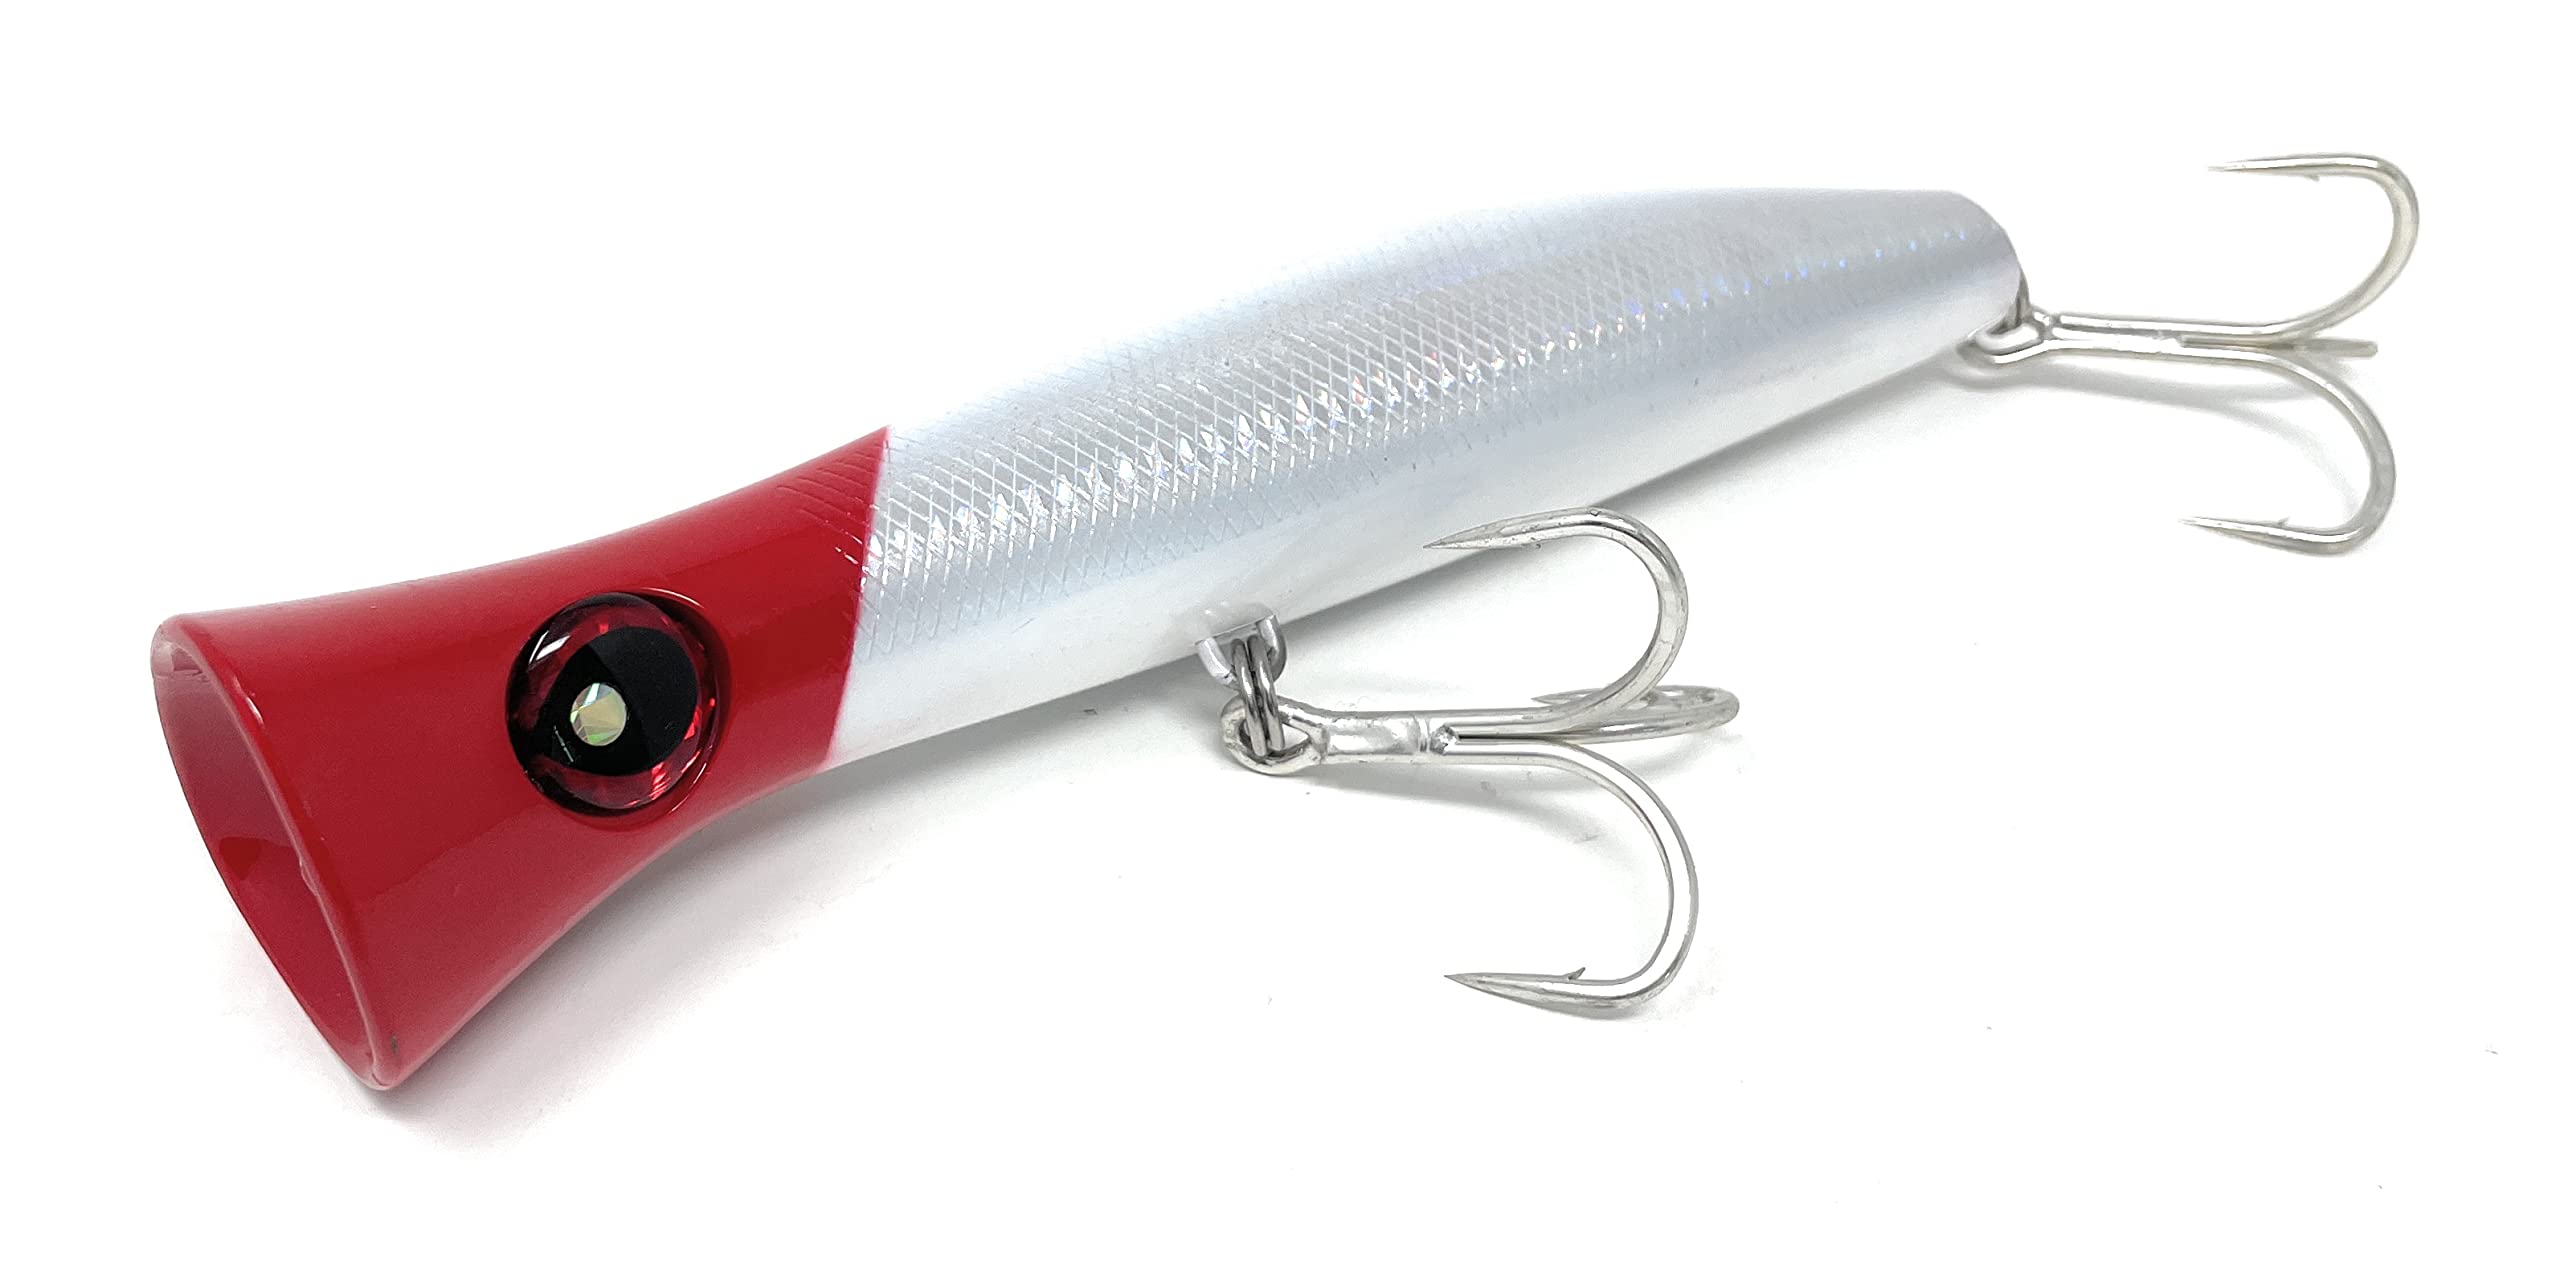 Capt Jay Fishing Saltwater Popper Lures topwater Floating Fishing